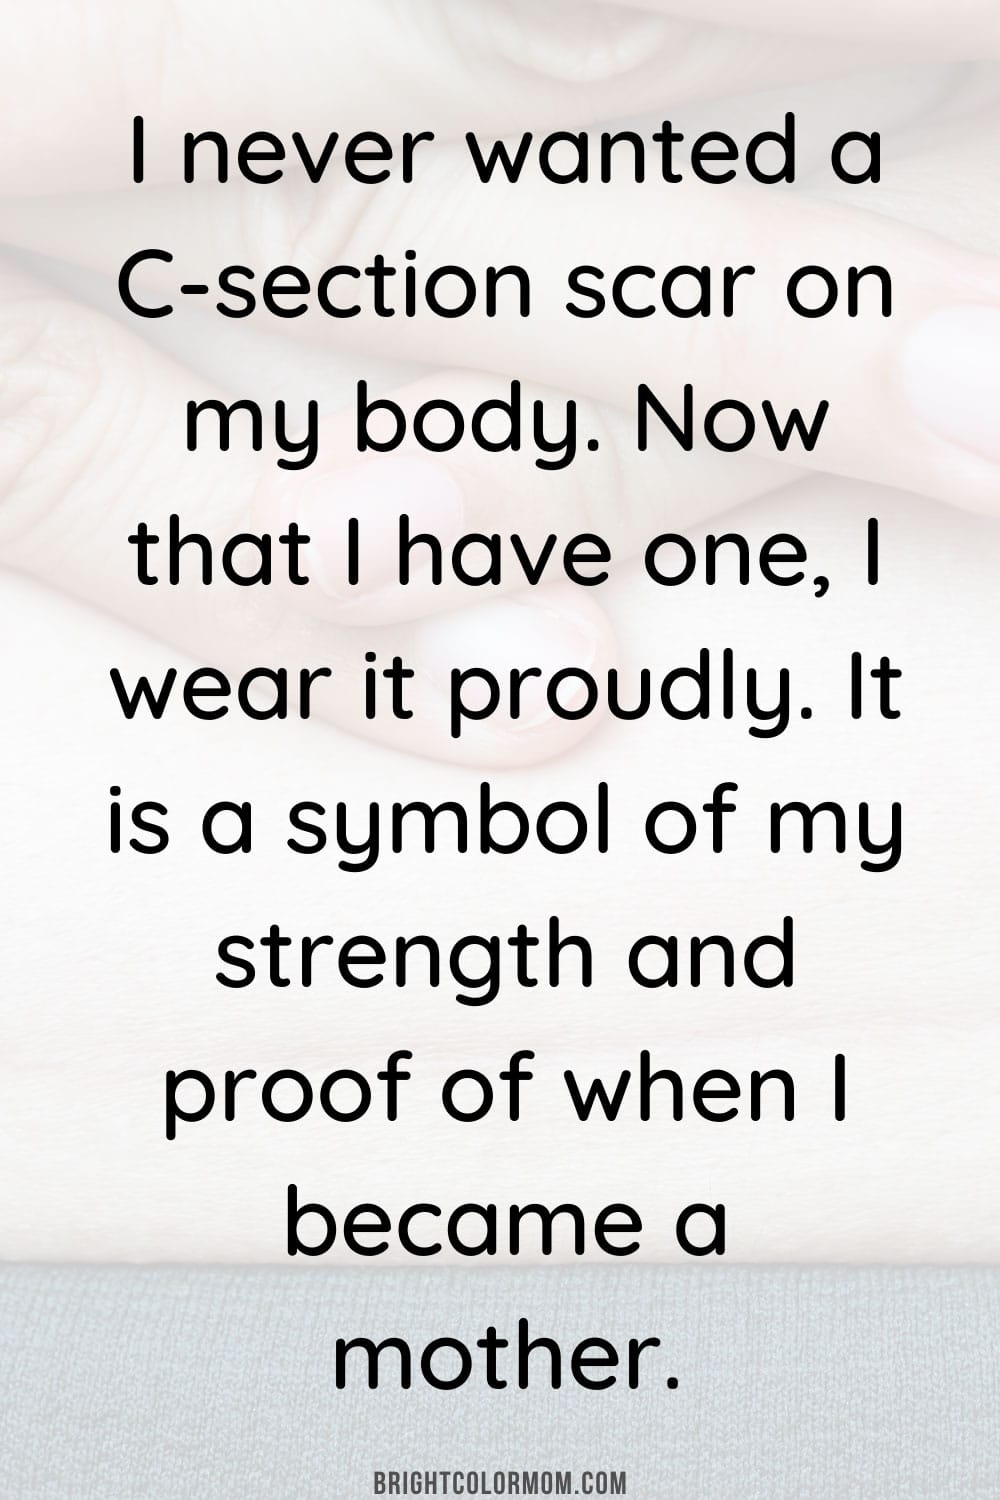 I never wanted a C-section scar on my body. Now that I have one, I wear it proudly. It is a symbol of my strength and proof of when I became a mother.